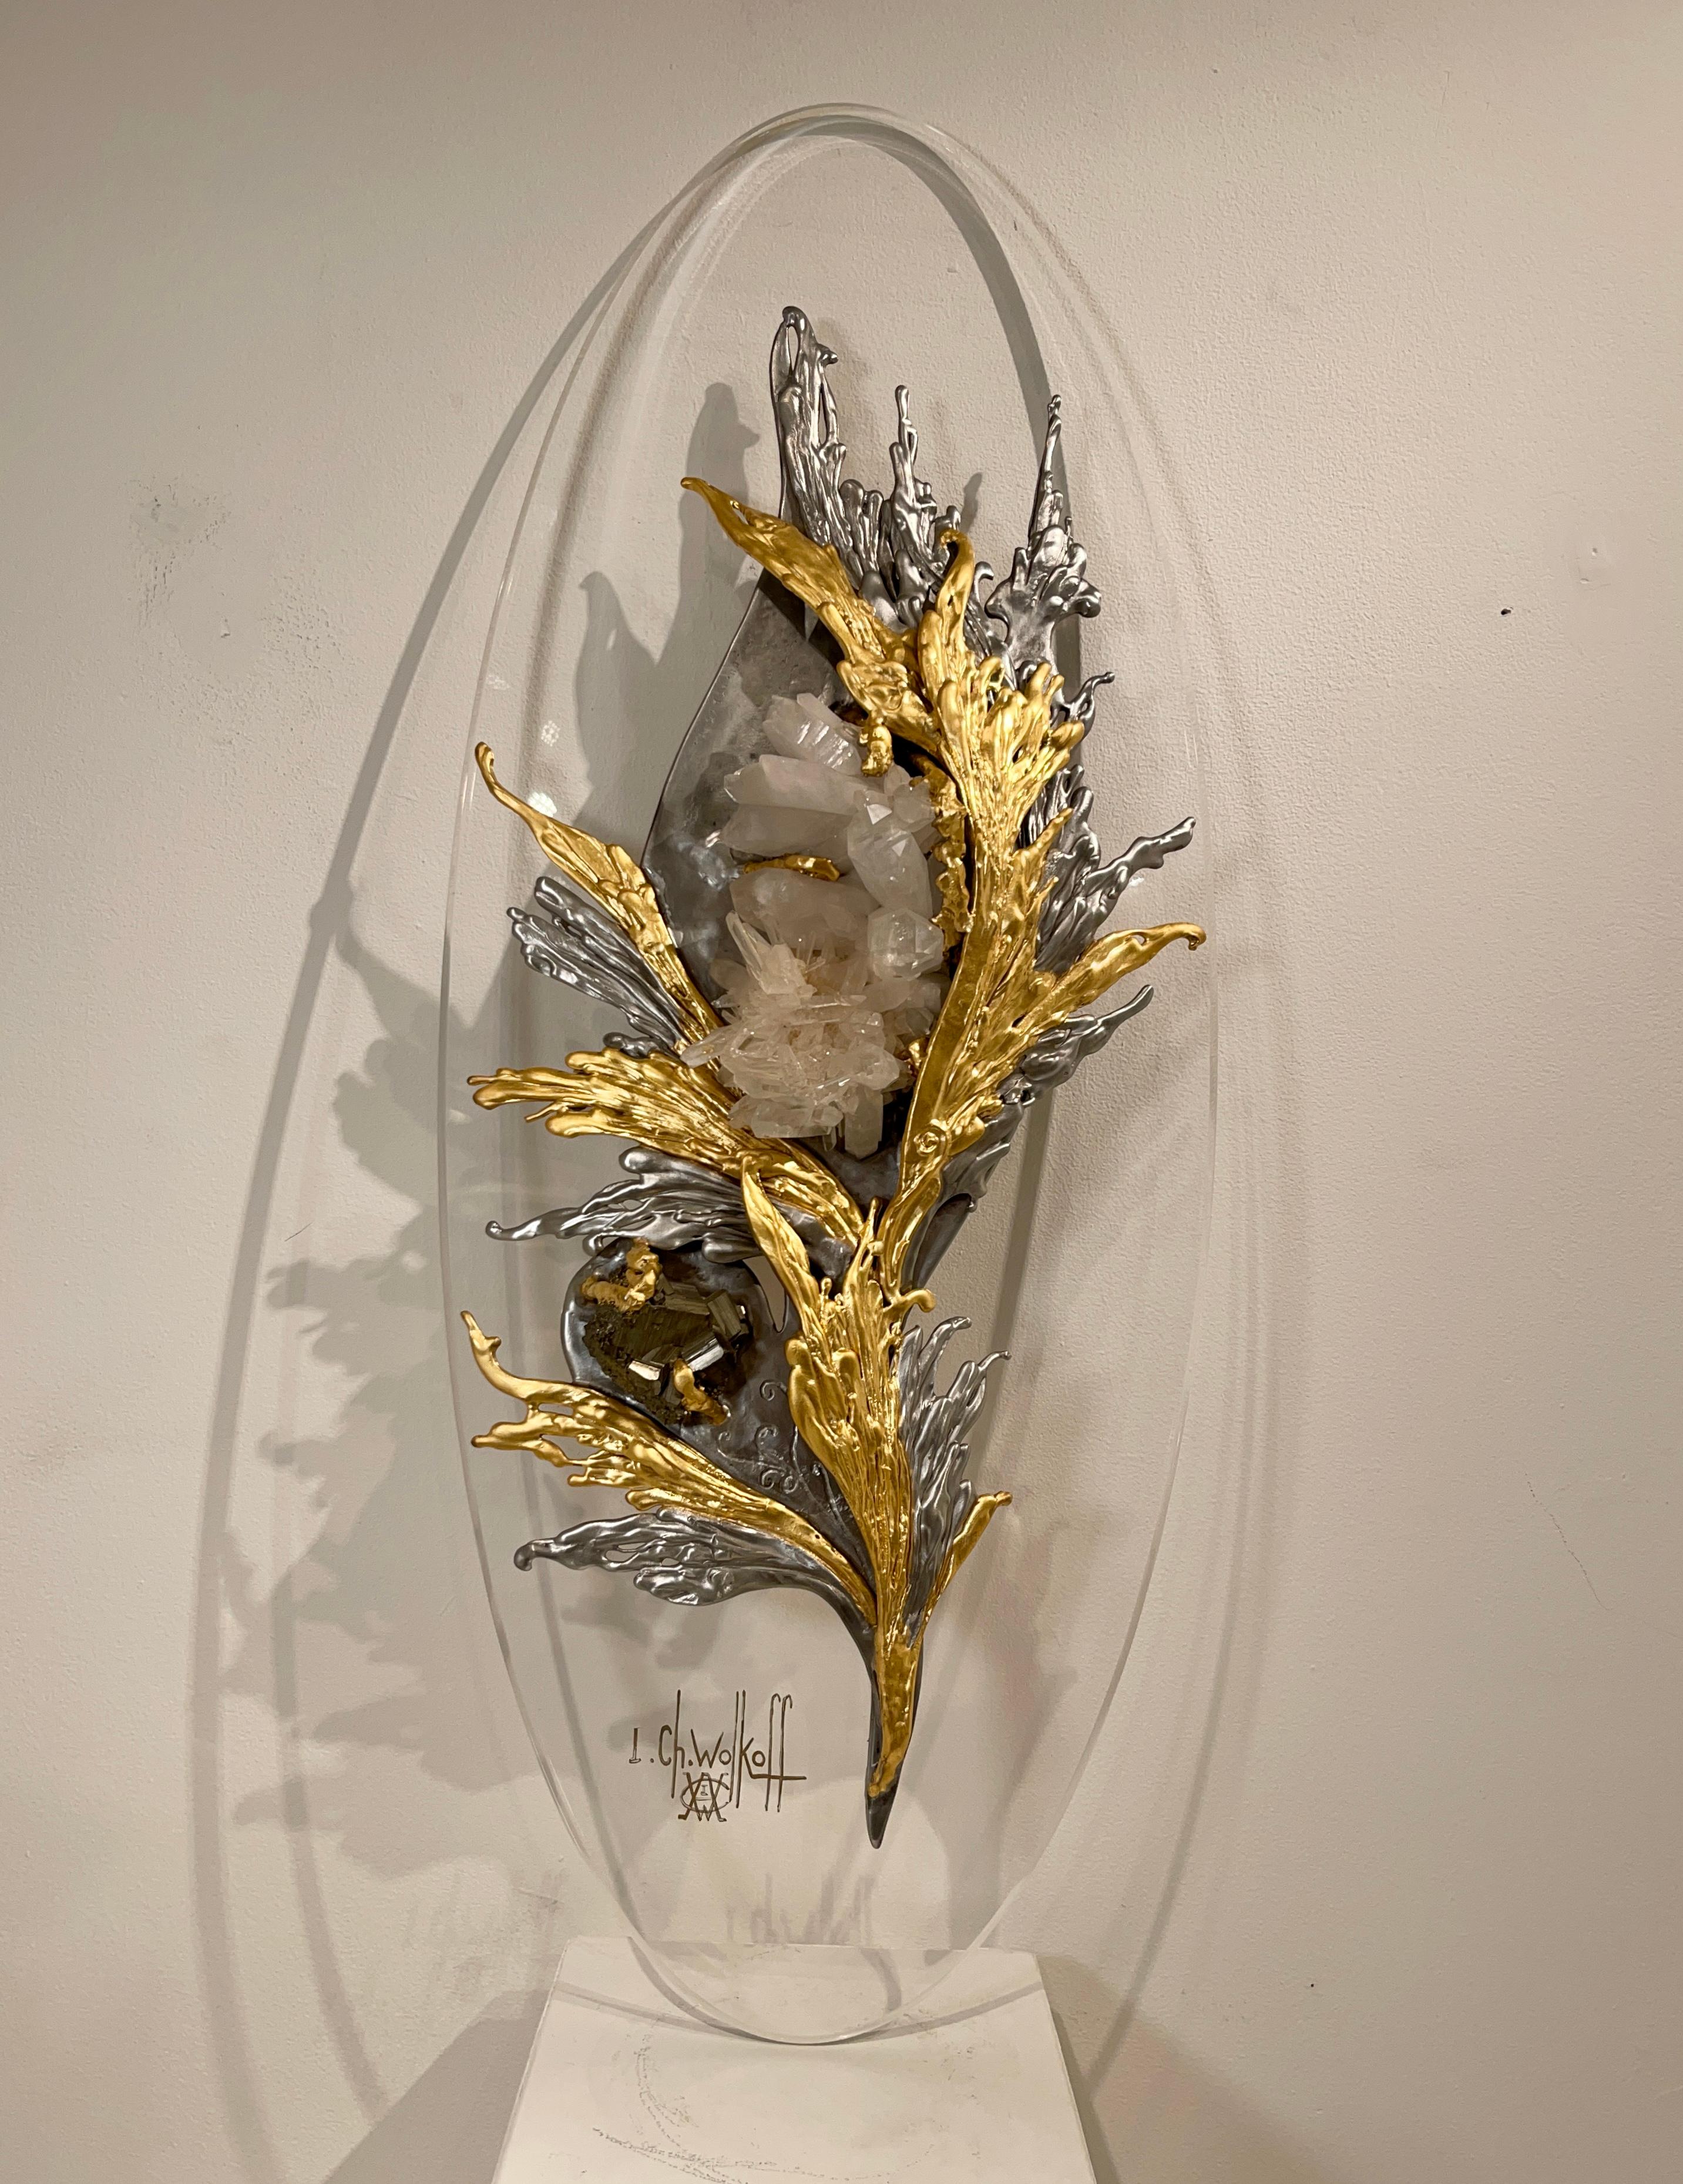 Ivan et Chantal Wolkoff. sculpture in lucite brass, metal and gemstone, quartz and pyrite. signed by the artist on the lucite and the metal.